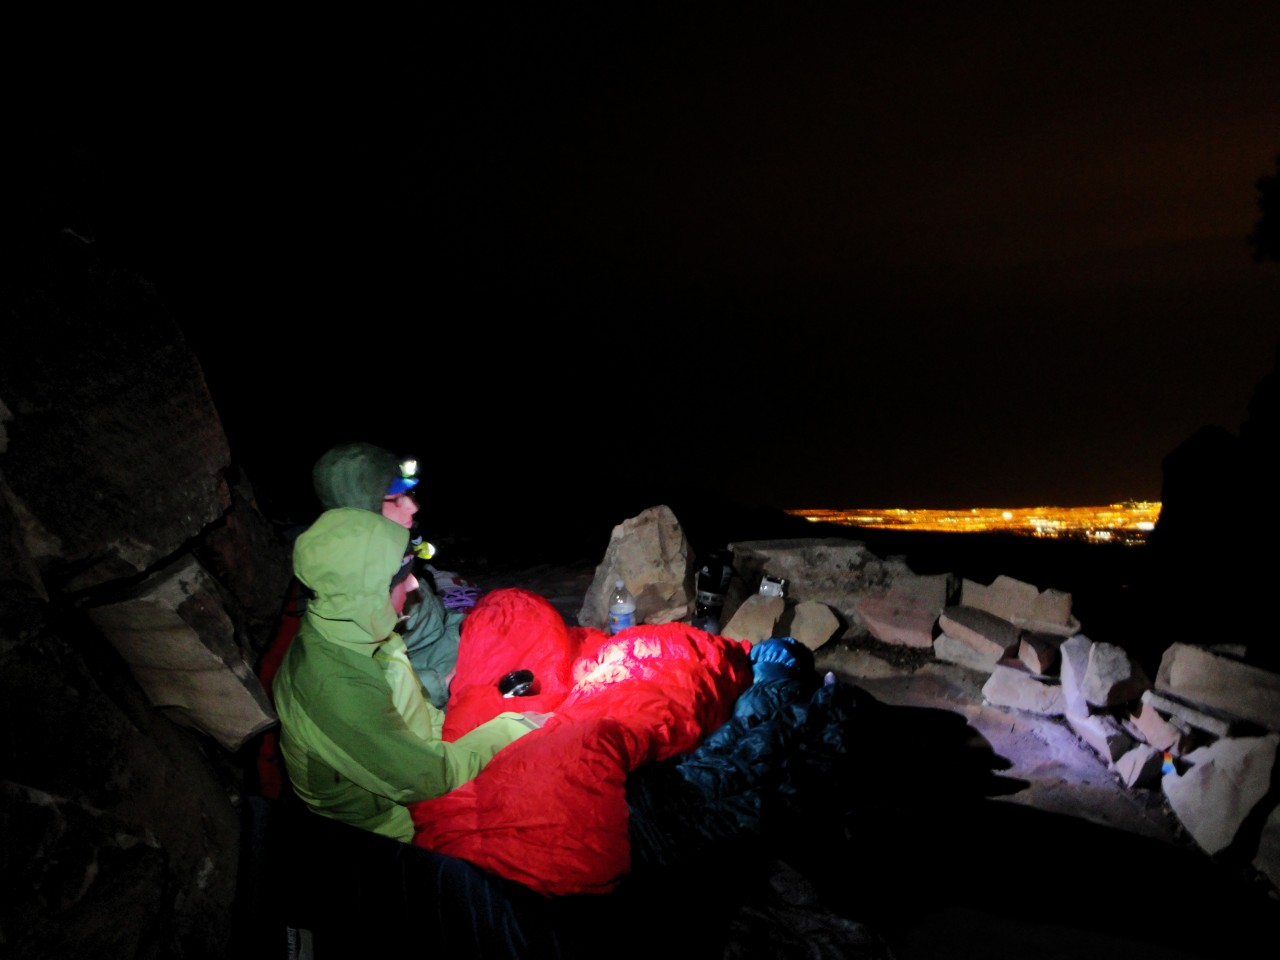 Pat and Josh looking out onto the encroaching city from their bivy below The Rainbow Wall.